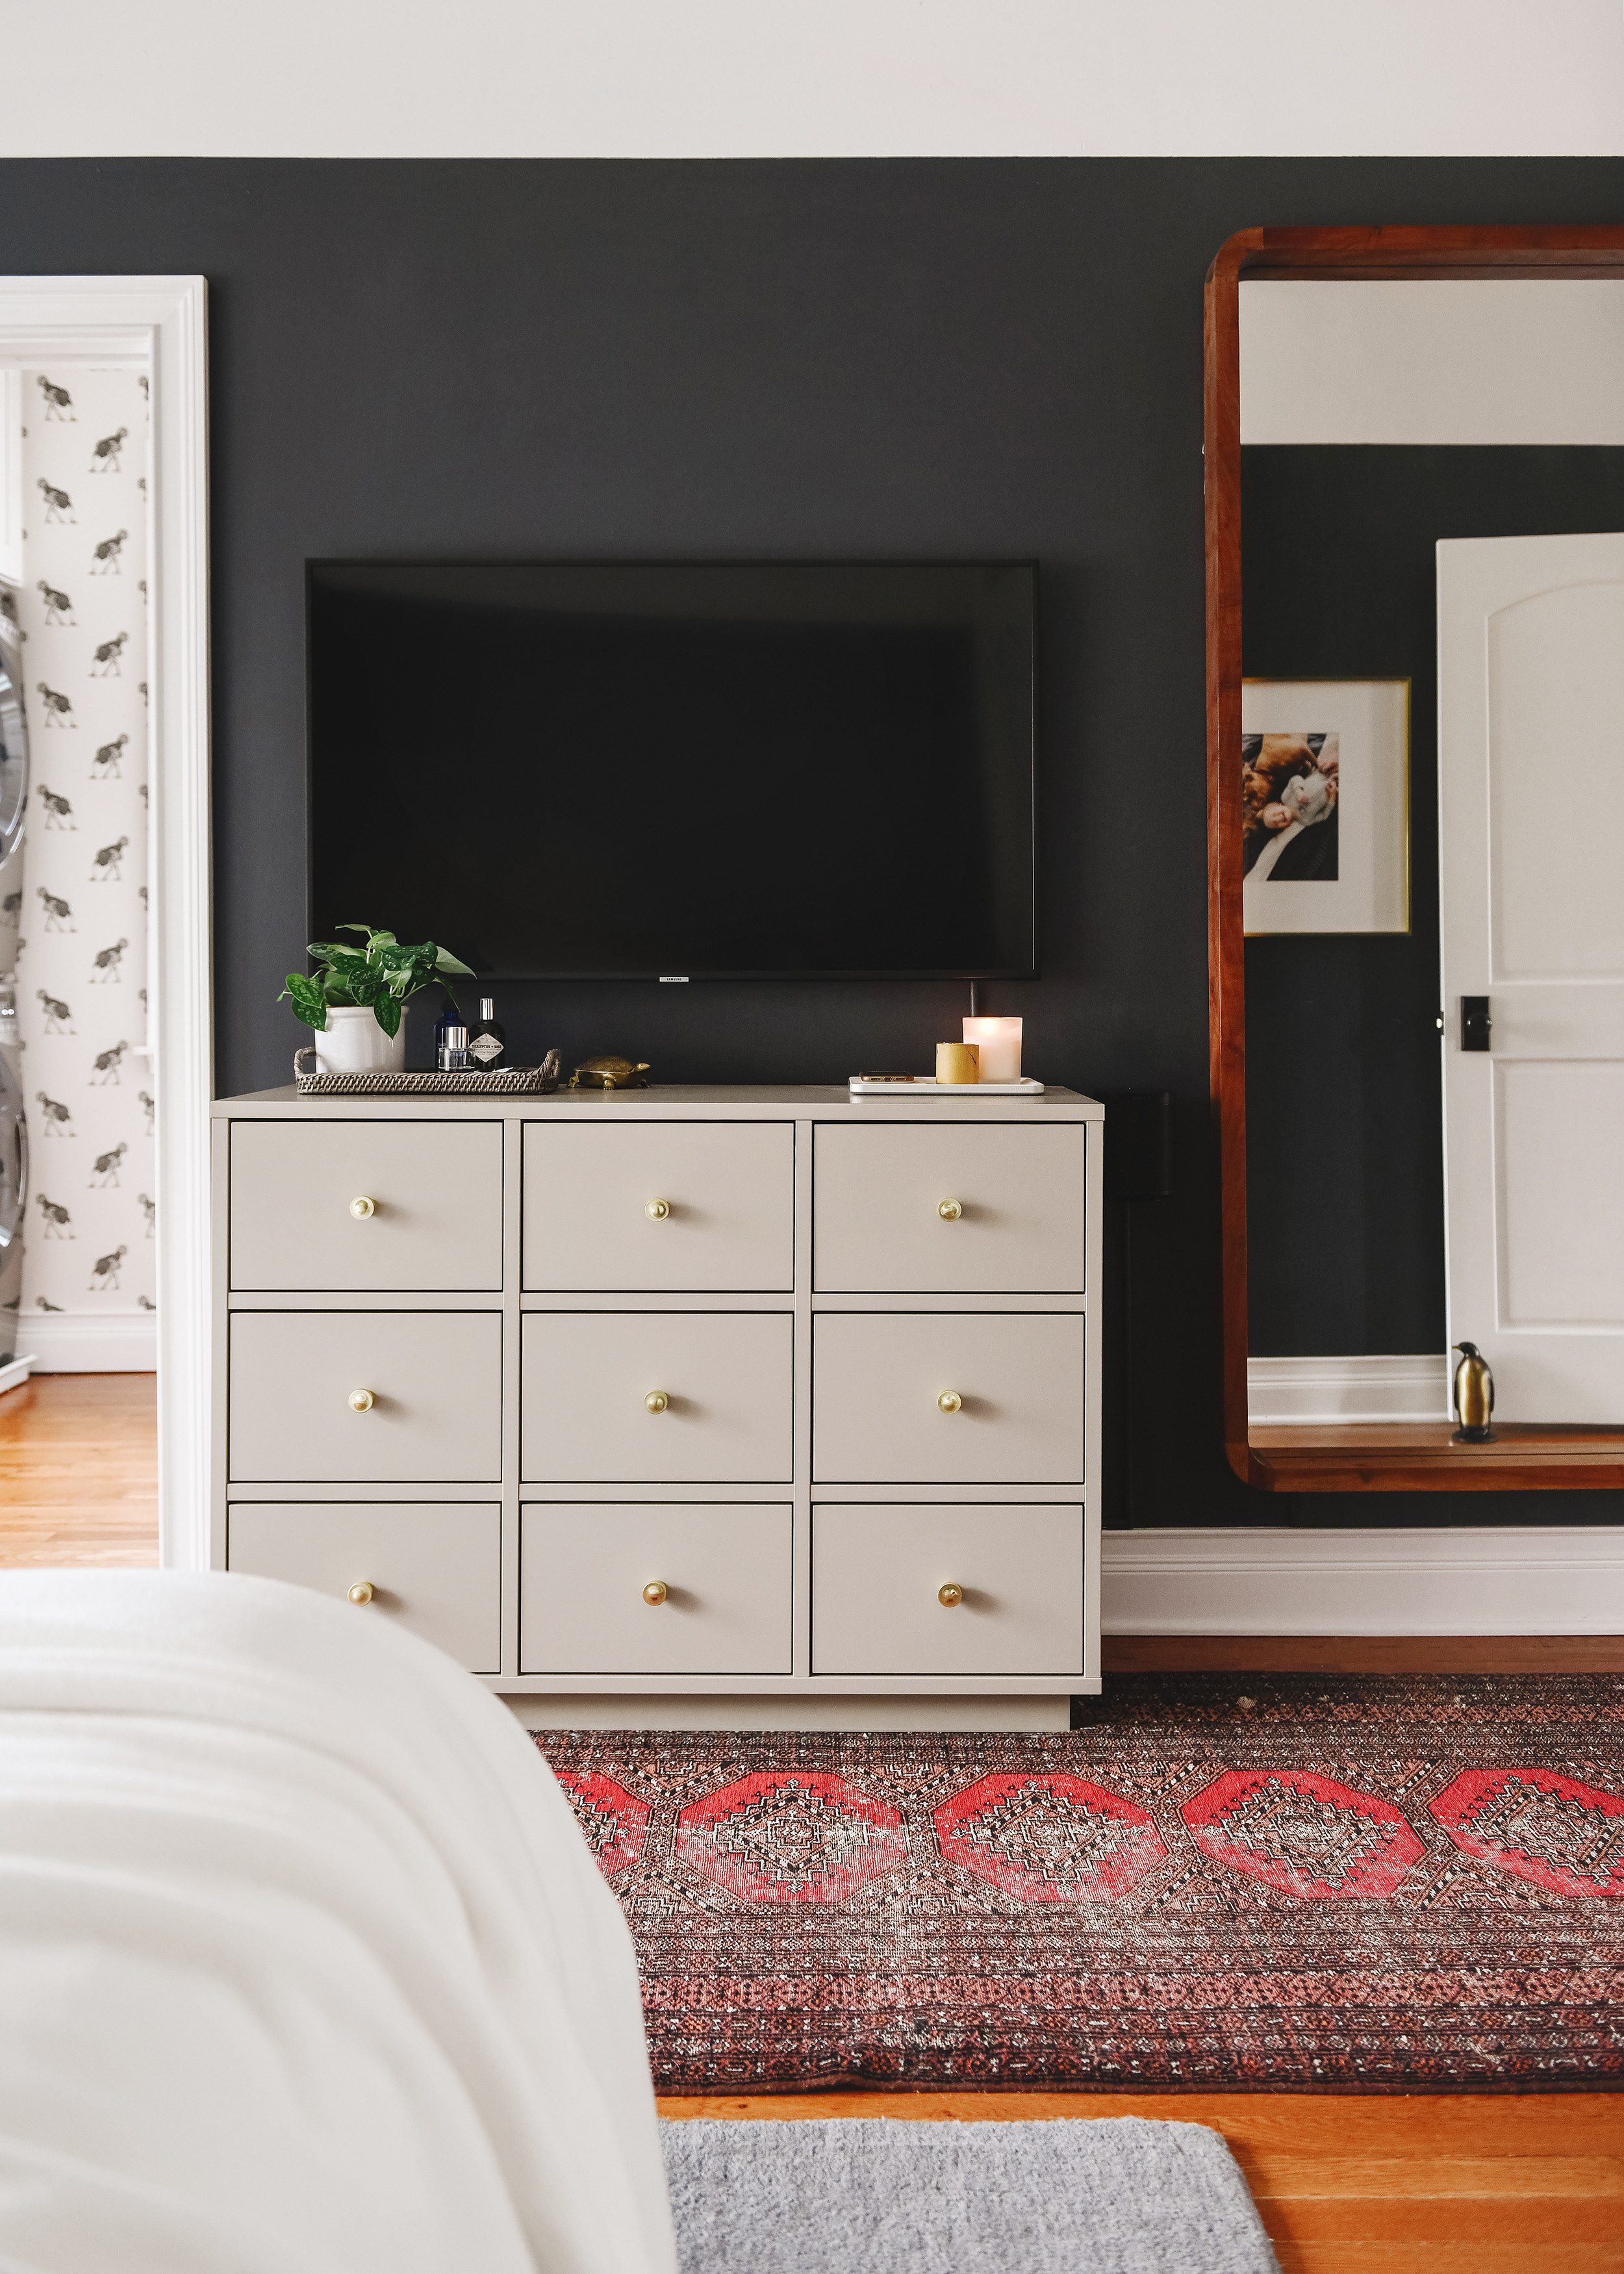 The completed dresser with upgraded brass knobs // via yelllow brick home